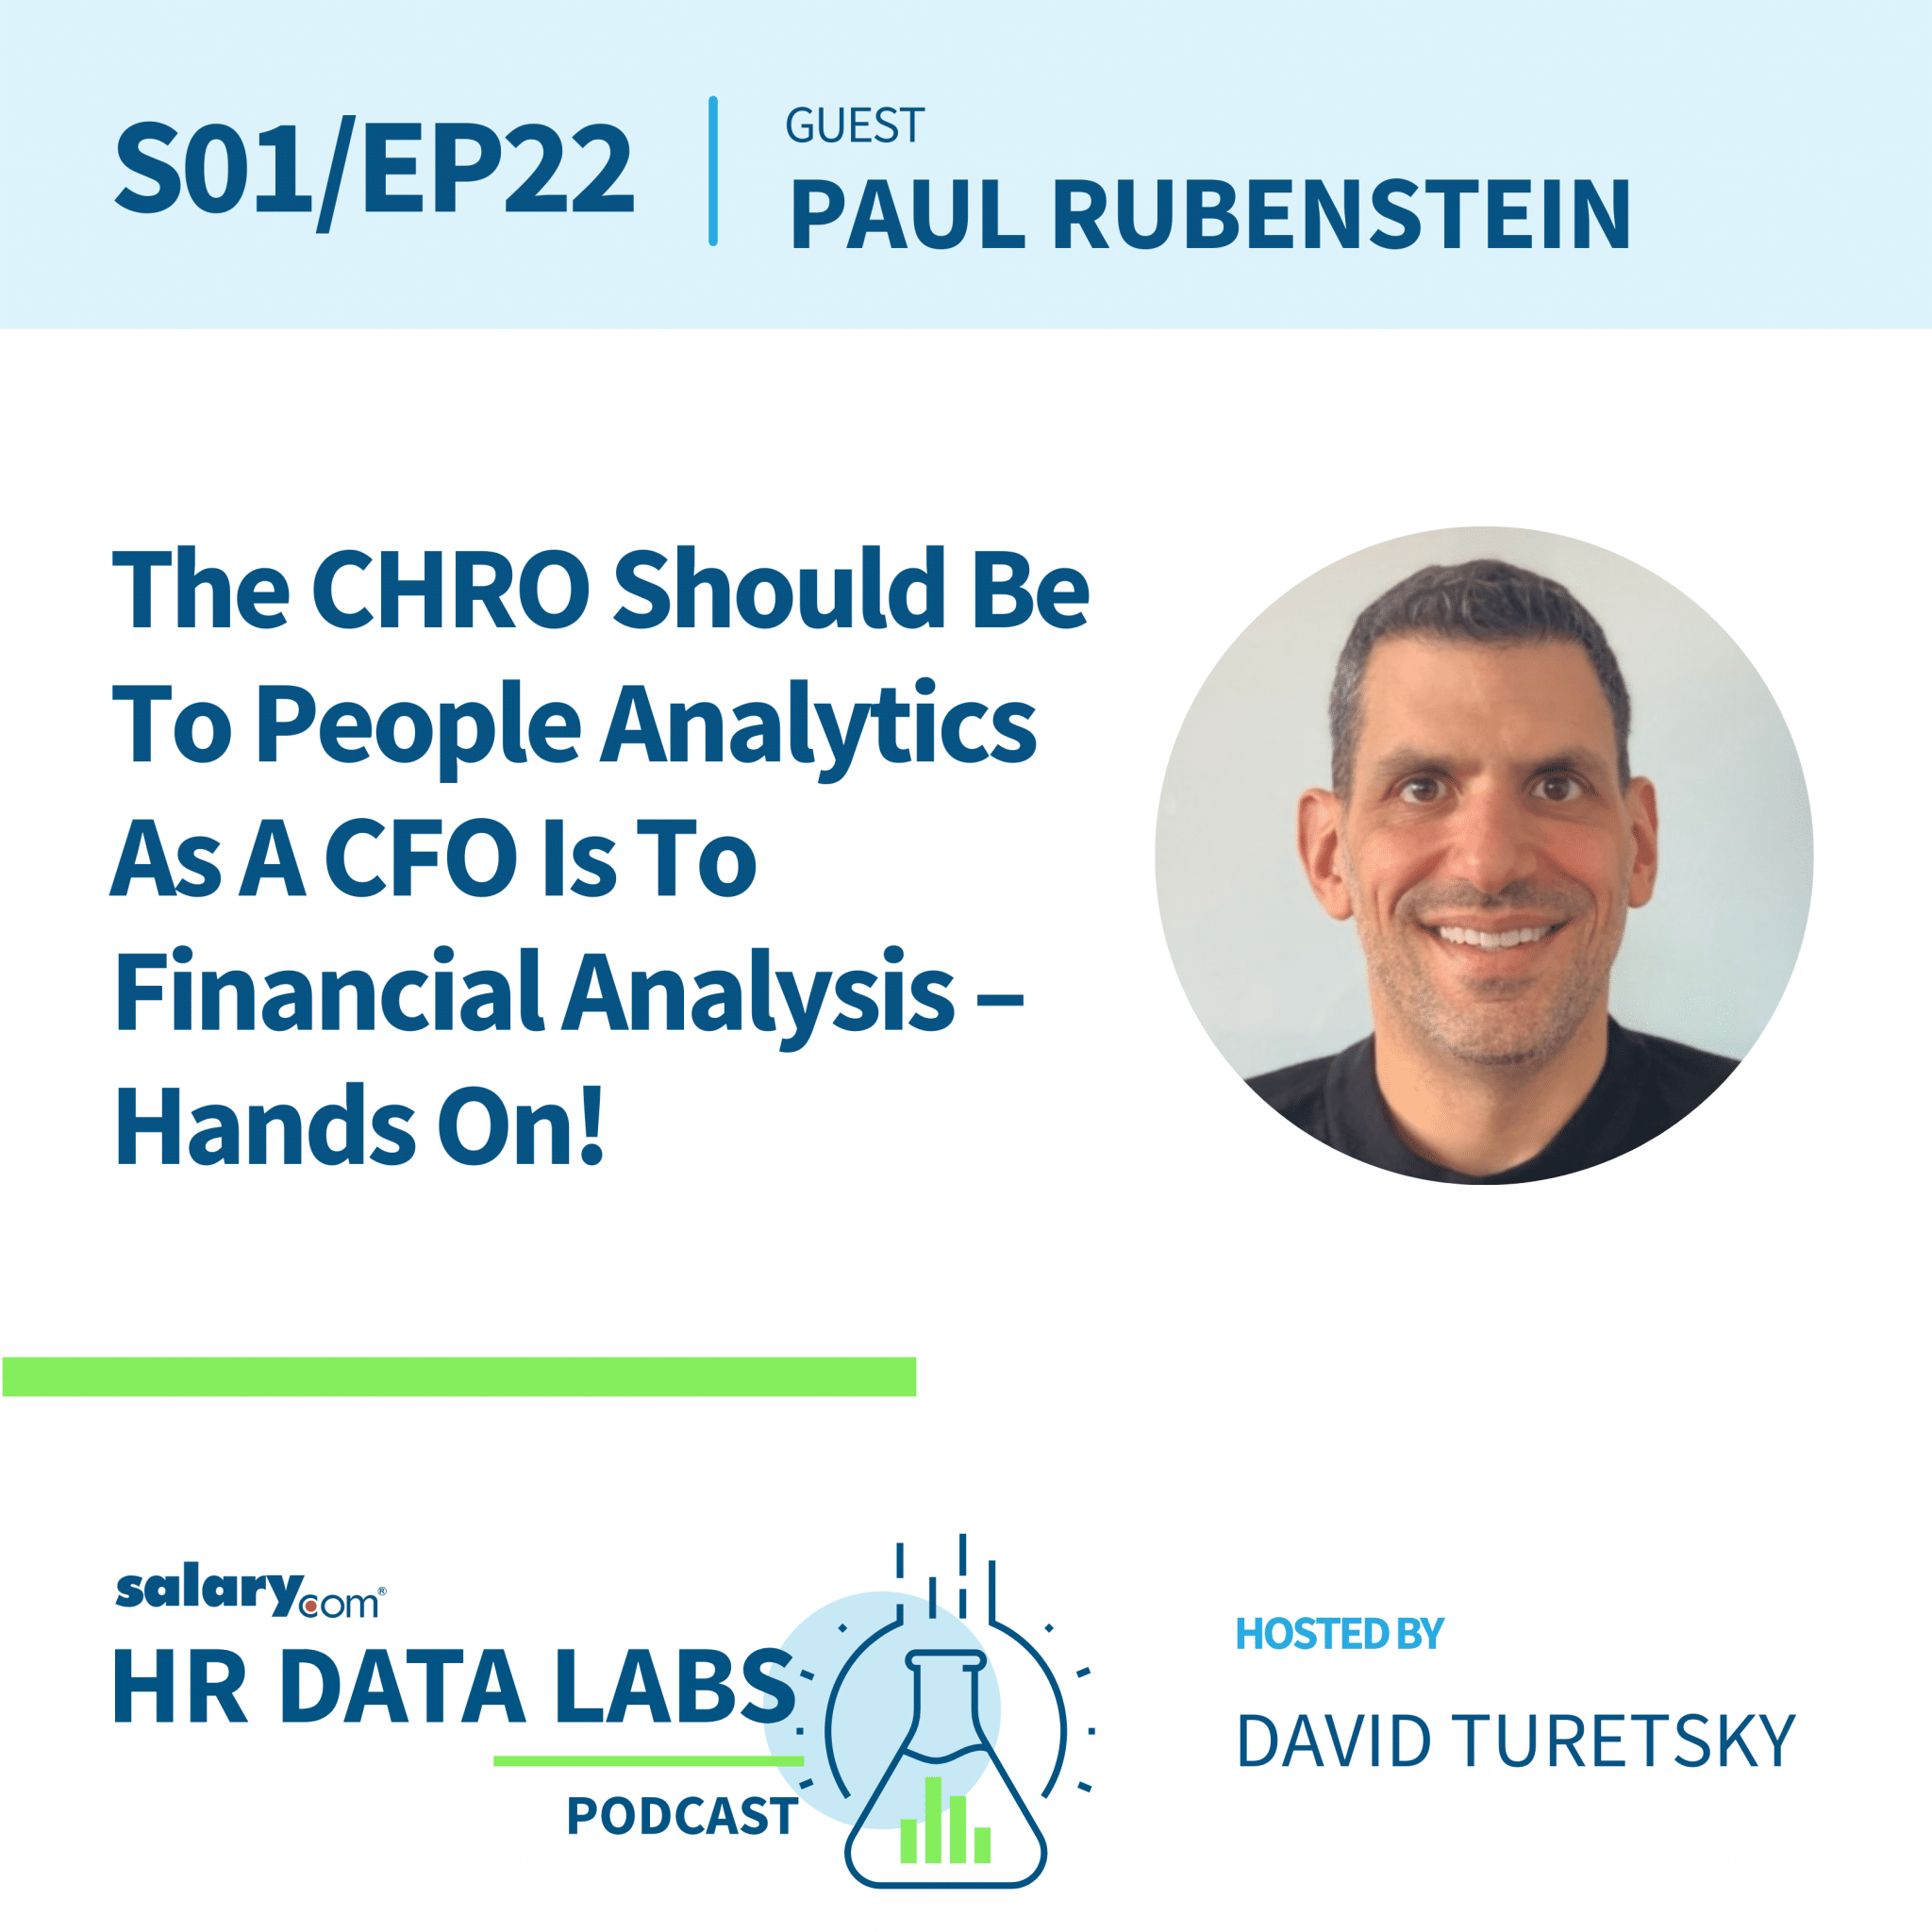 The CHRO Should Be to People Analytics as A CFO is to Financial Analysis – Hands On!